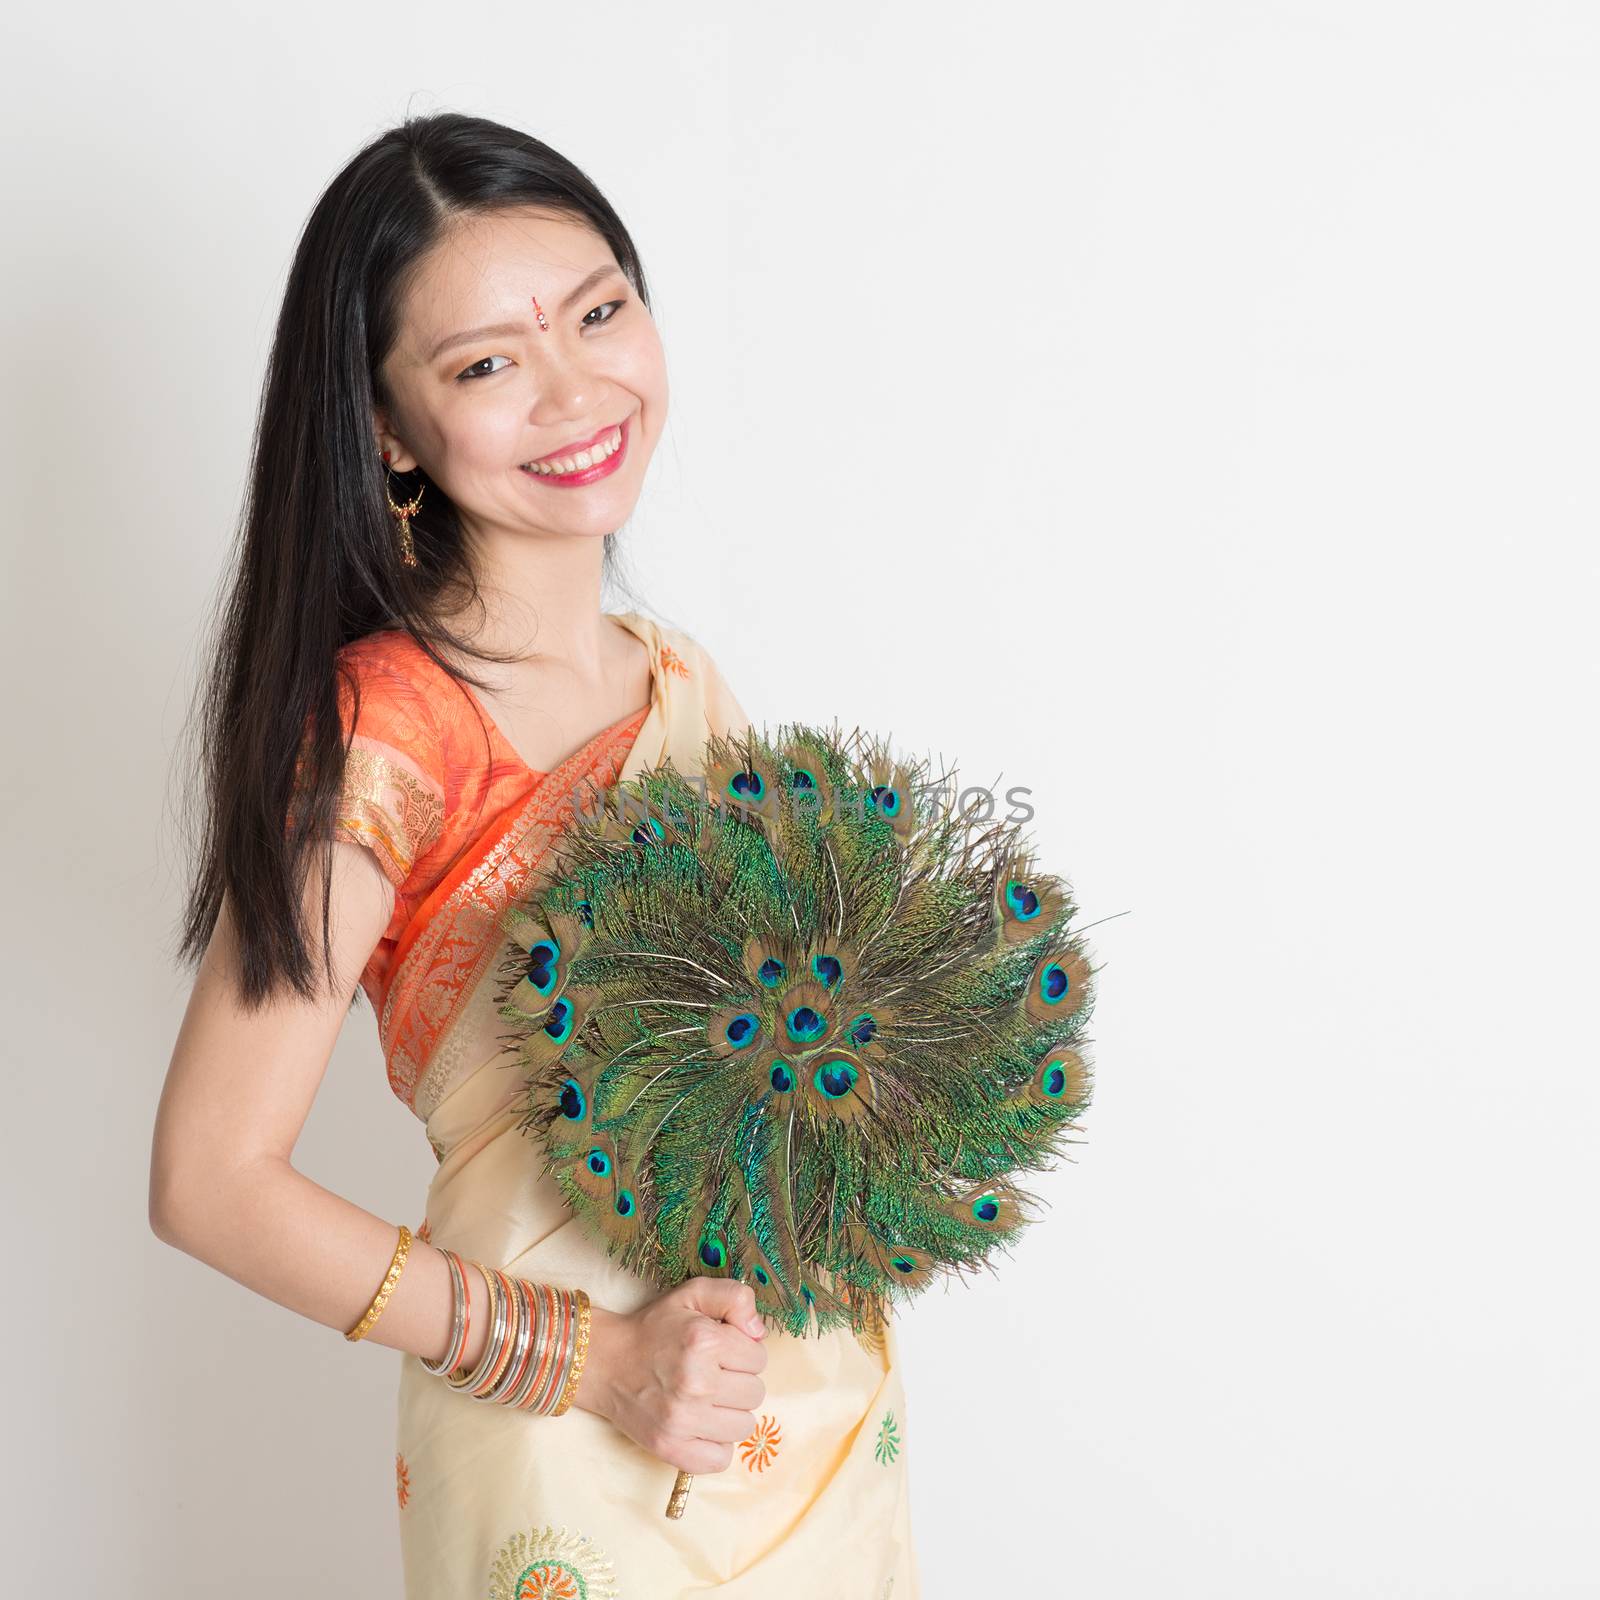 Portrait of young mixed race Indian Chinese woman in traditional sari dress, holding peacock feathers fan and looking at camera, on plain background.